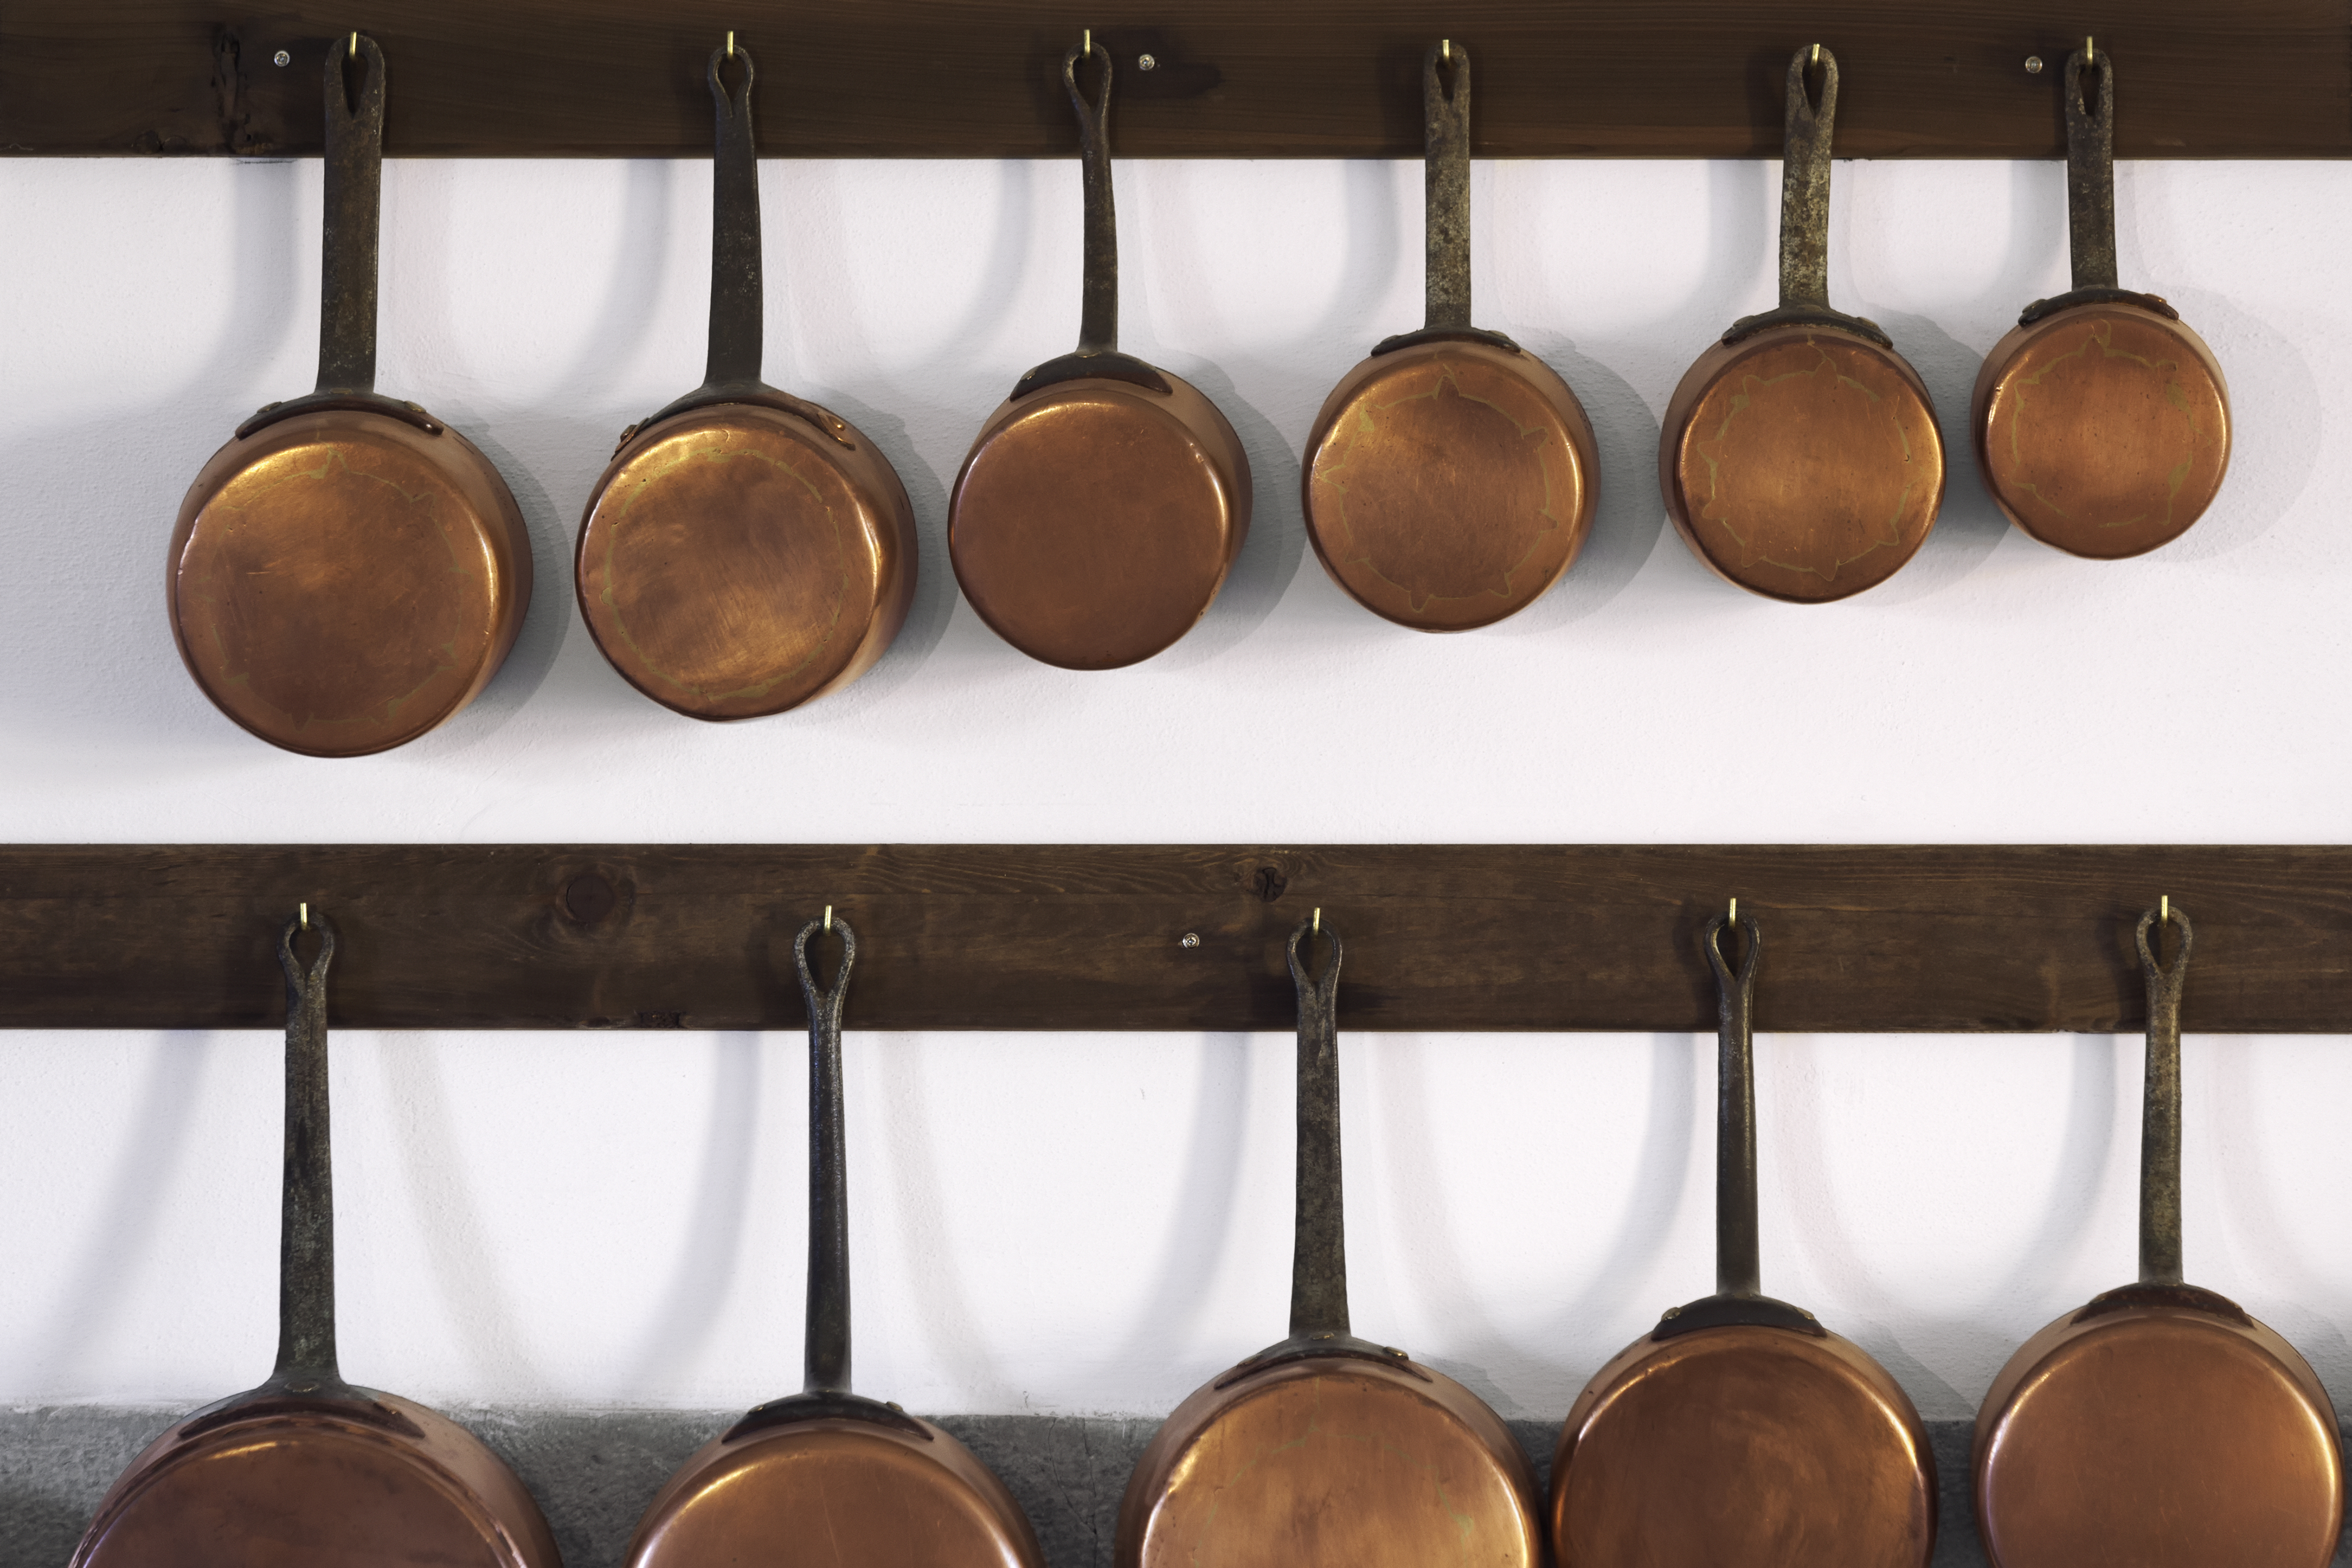 Are Red Copper Pans Safe? - Books to Cooks